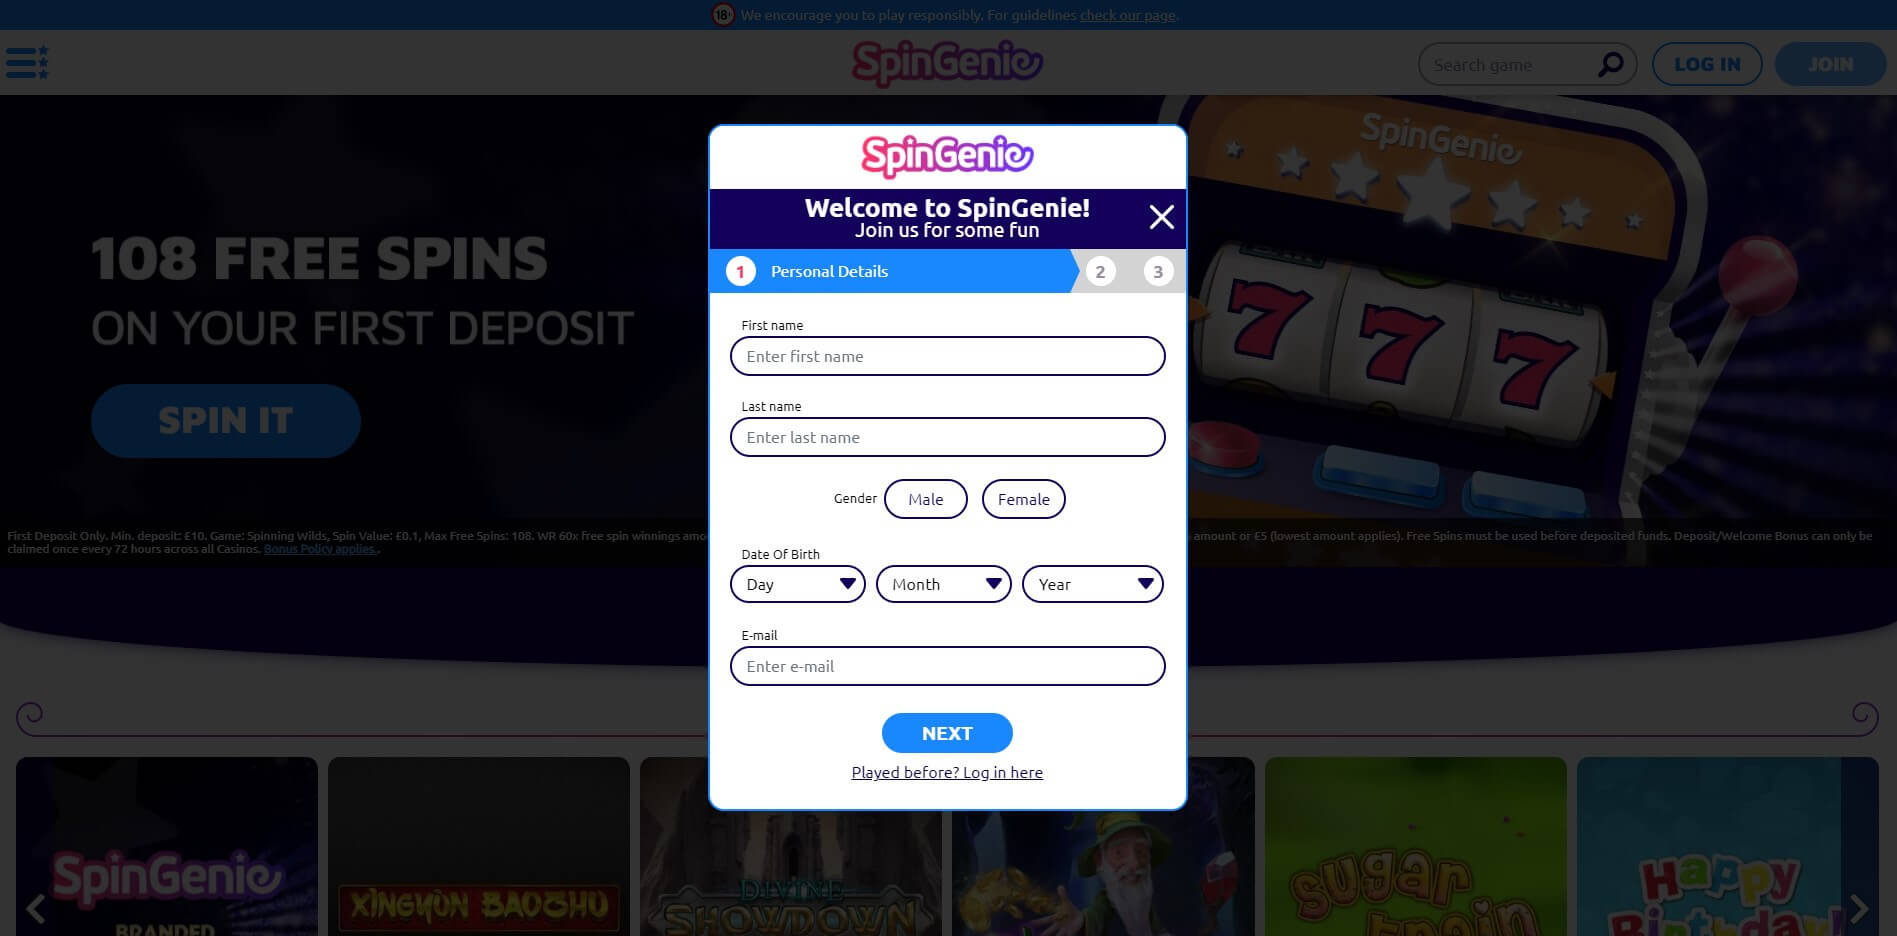 Sign Up at SpinGenie Casino